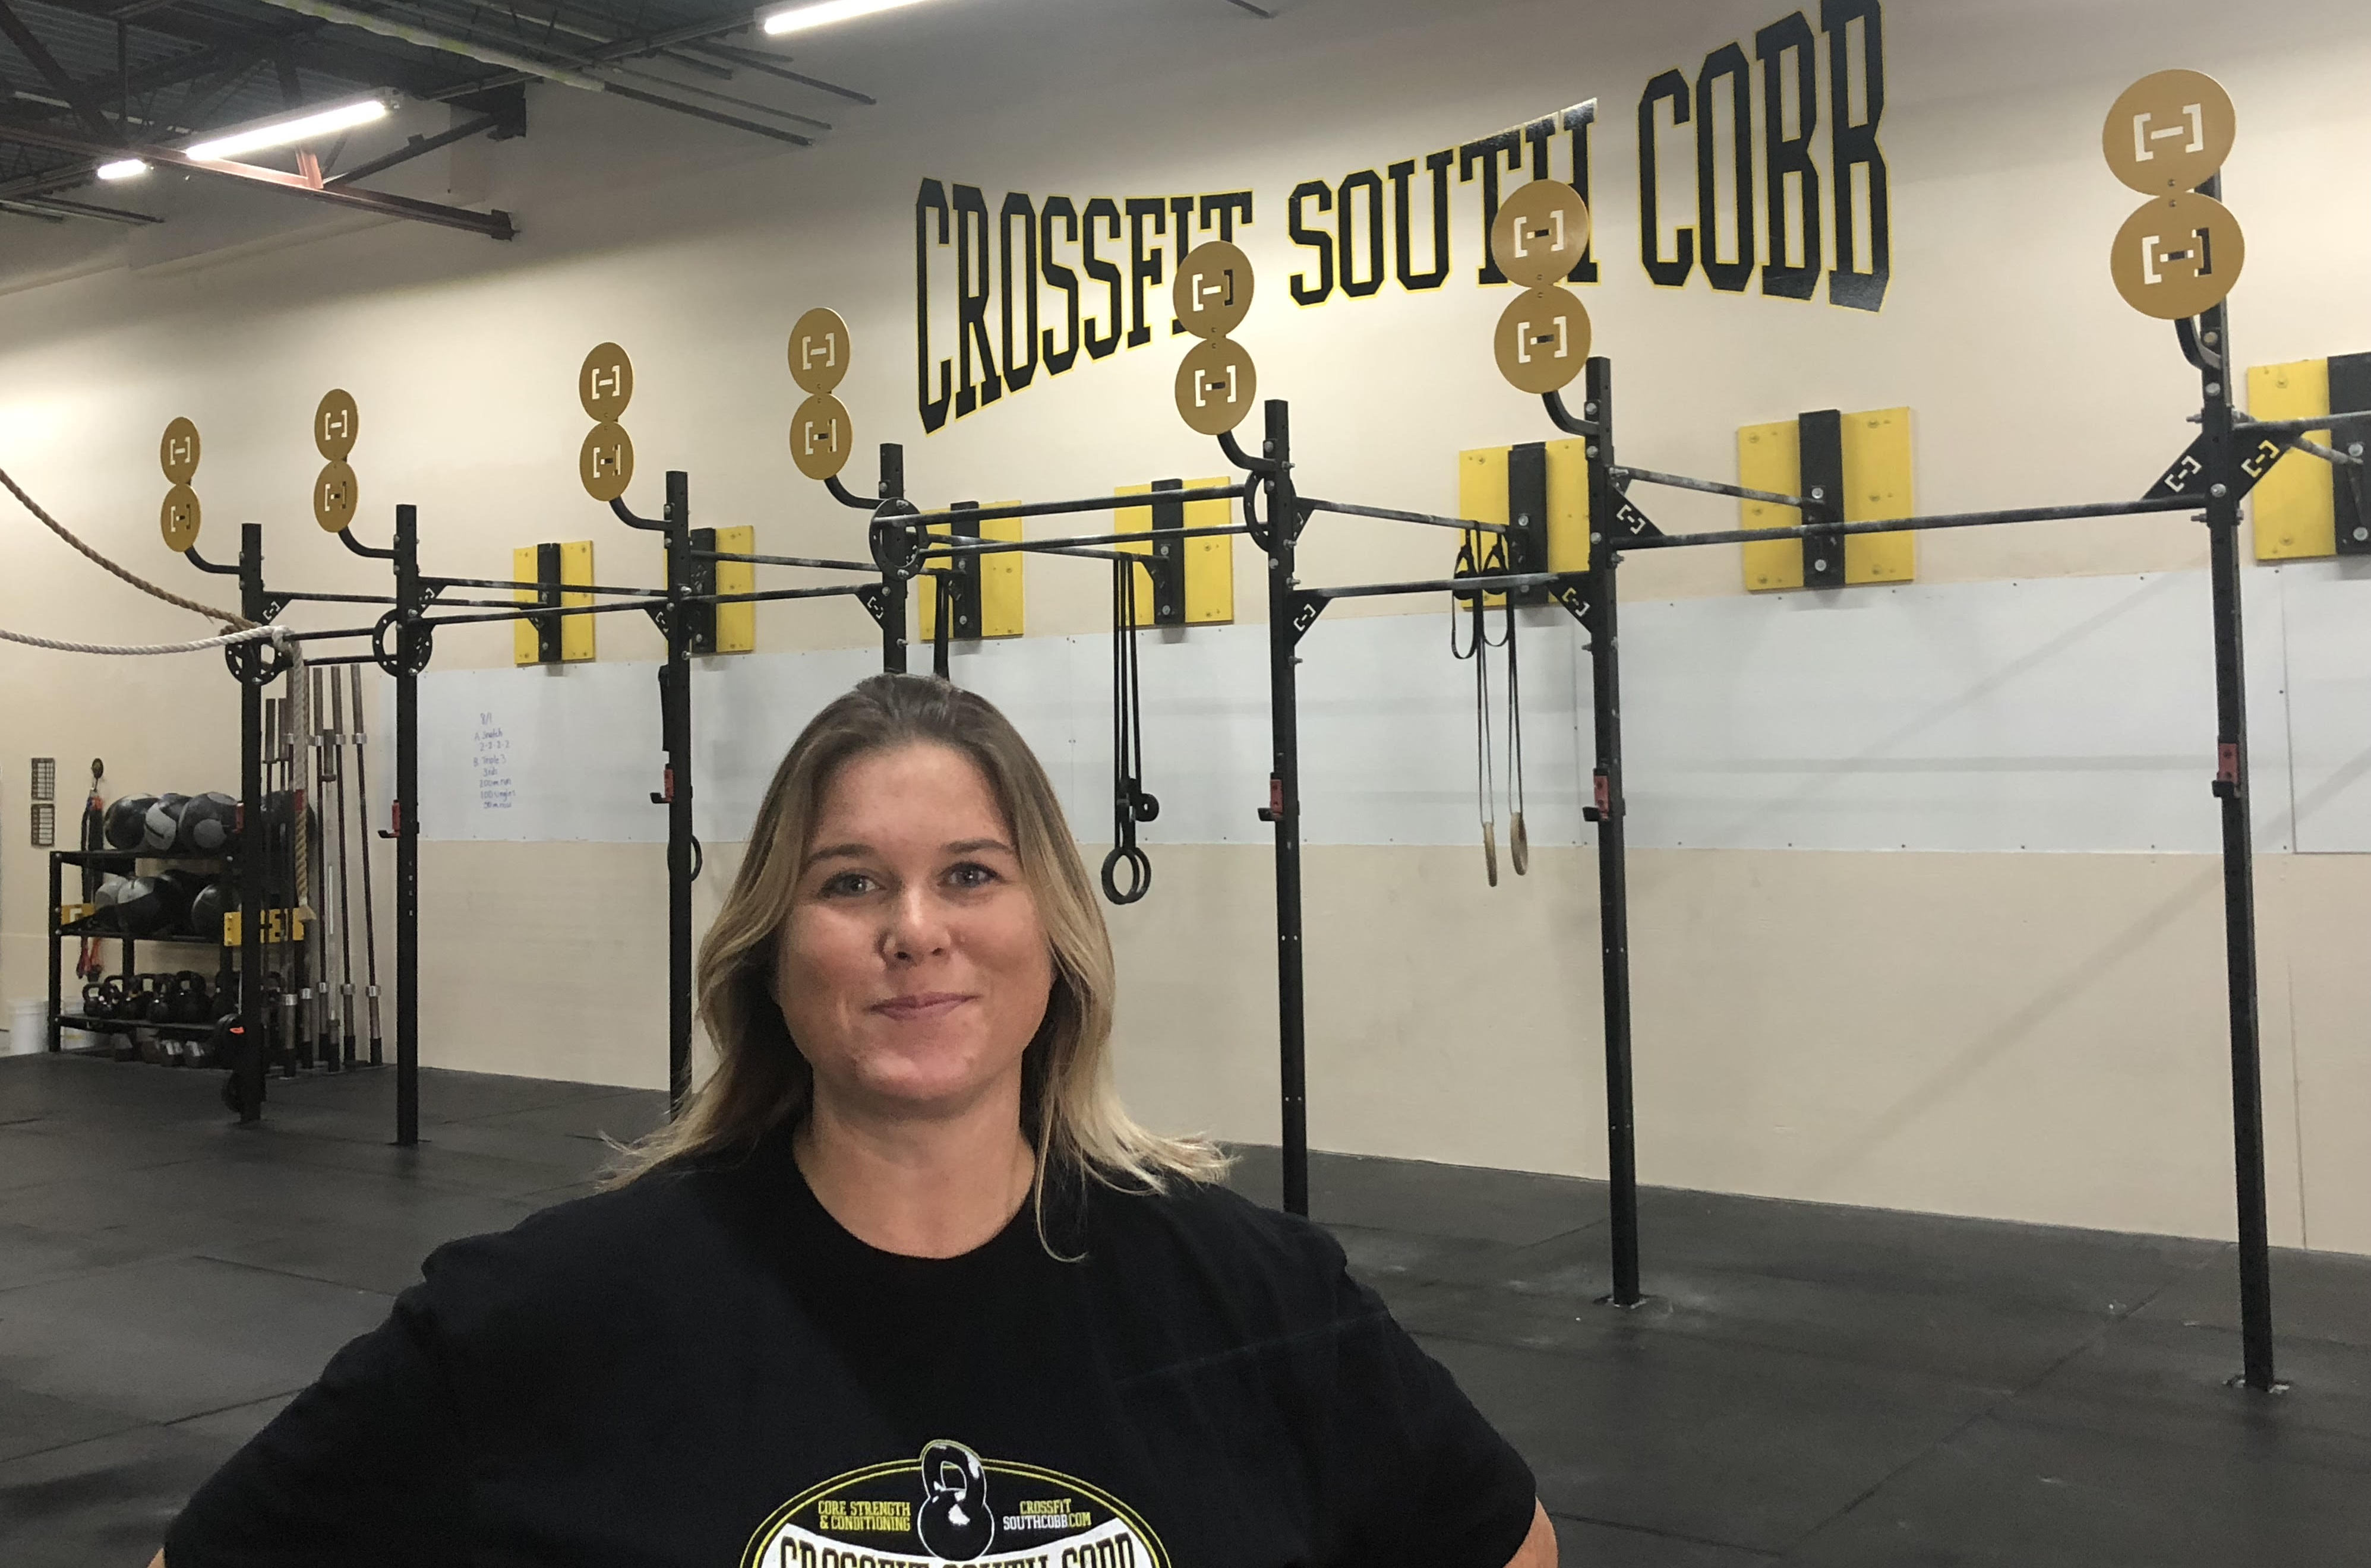 4 Simple Tips to Enjoy CrossFit to the Fullest - CrossFit South Cobb